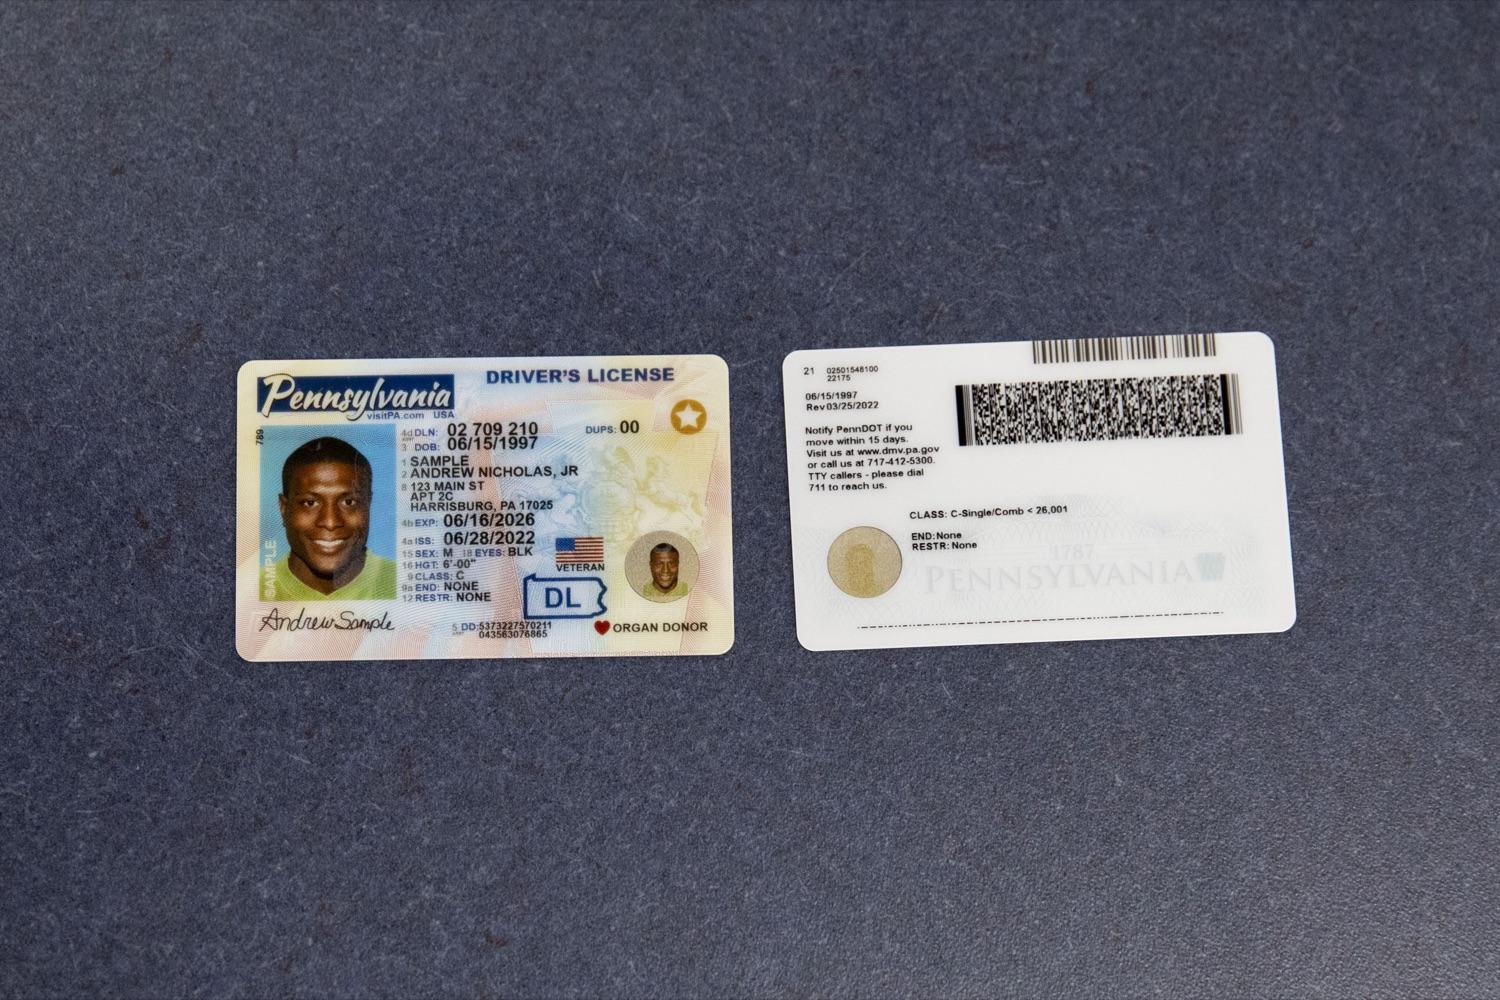 PennDOT reminds customers of updates to identification products as part of ongoing security enhancements, in Enola, PA on September 22, 2022.<br><a href="https://filesource.amperwave.net/commonwealthofpa/photo/22223_dot_security_cz_03.jpg" target="_blank">⇣ Download Photo</a>